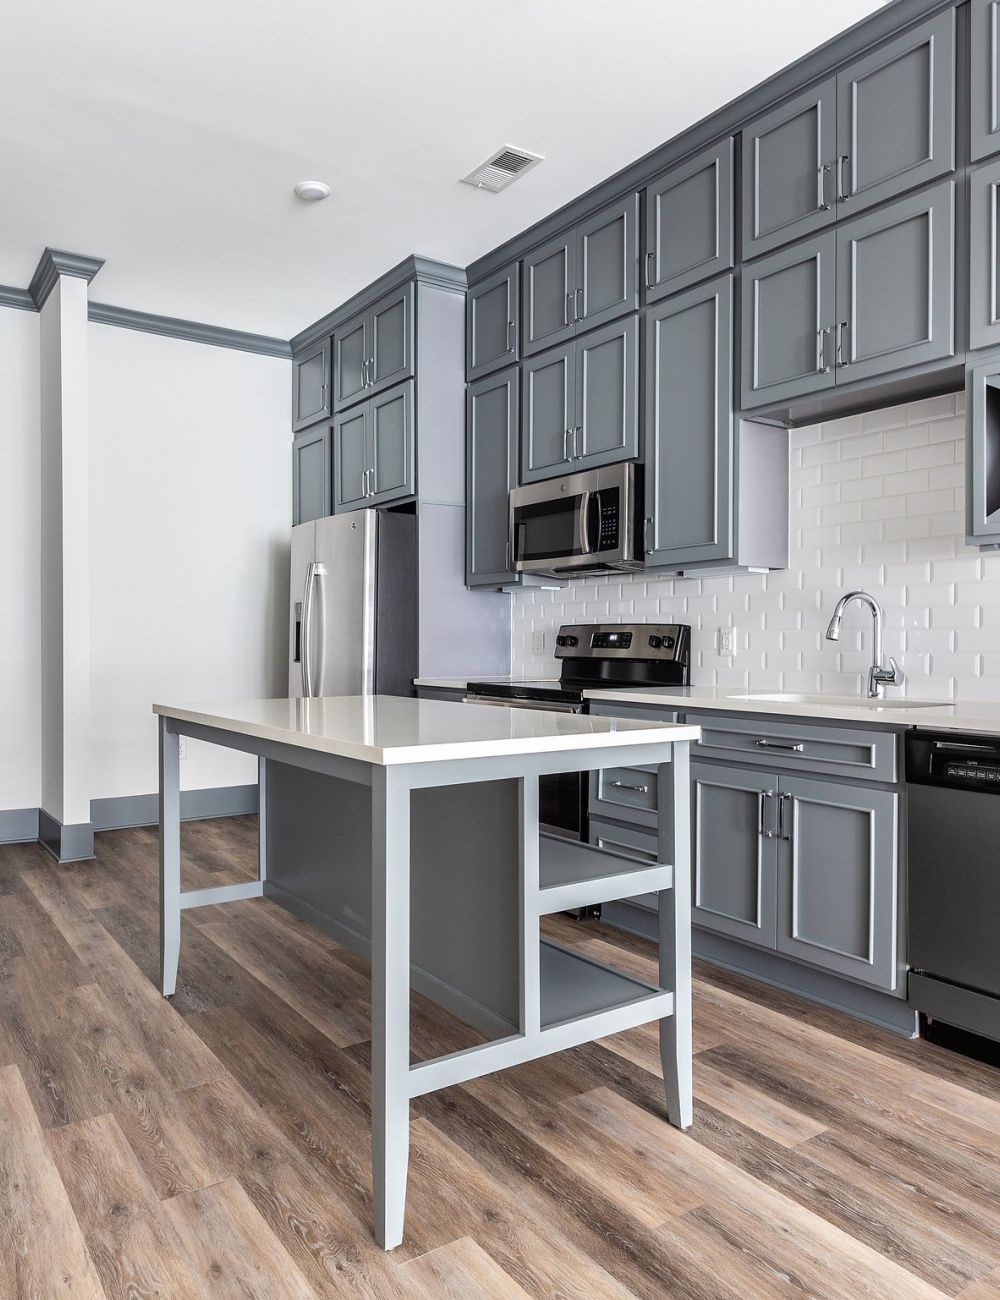 Luxury apartment kitchen interior with stainless steel appliances, beautiful gray cabinetry, and luxury vinyl plank flooring